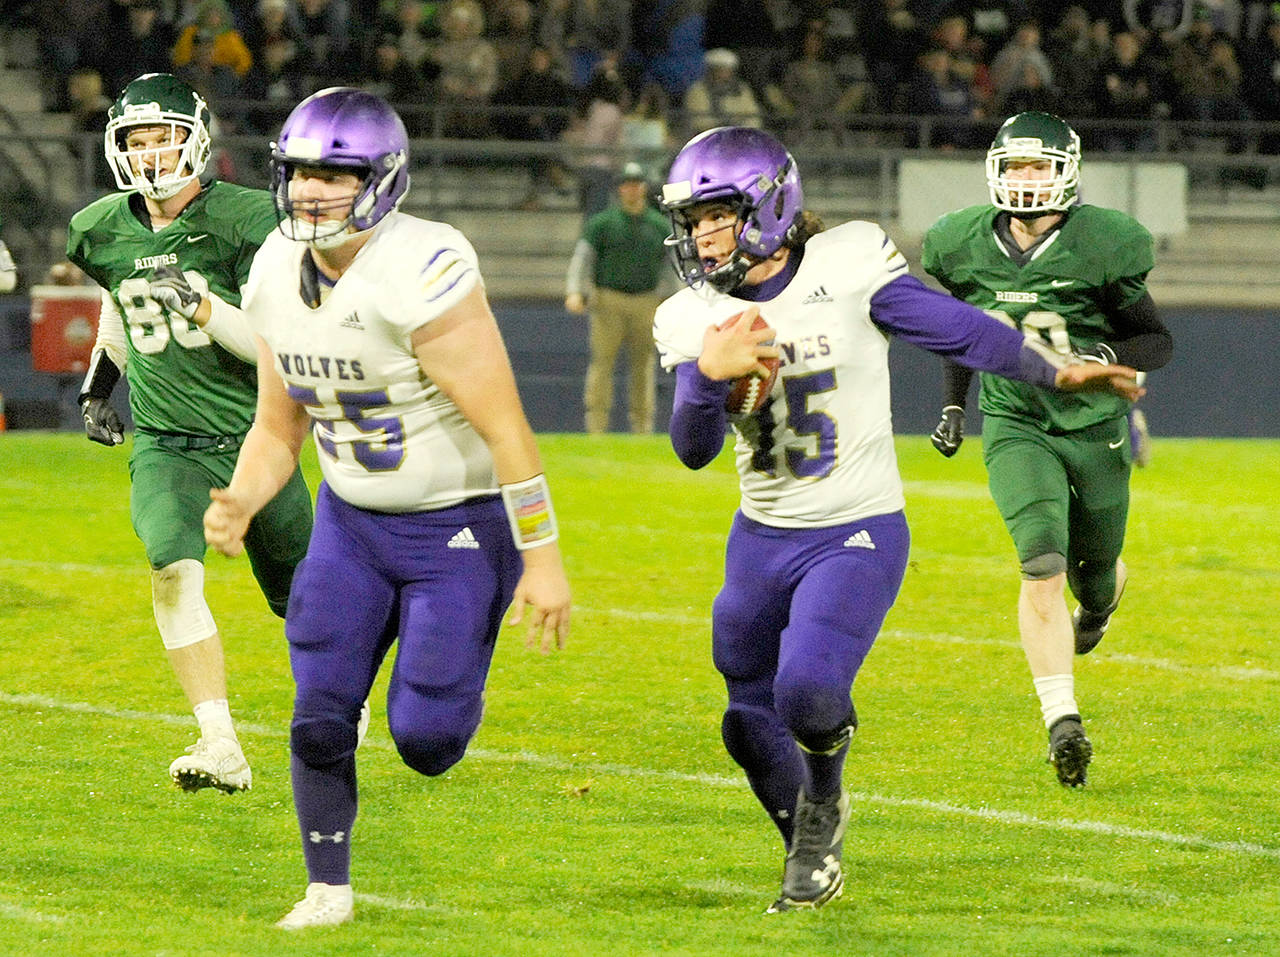 Michael Dashiell/Olympic Peninsula News Group With Brandon Barnett (55) leading the way, Sequim quarterback Taig Wiker picks up a big gain in the first quarter of the Rainshadow Rumble at Civic Field on Friday night.